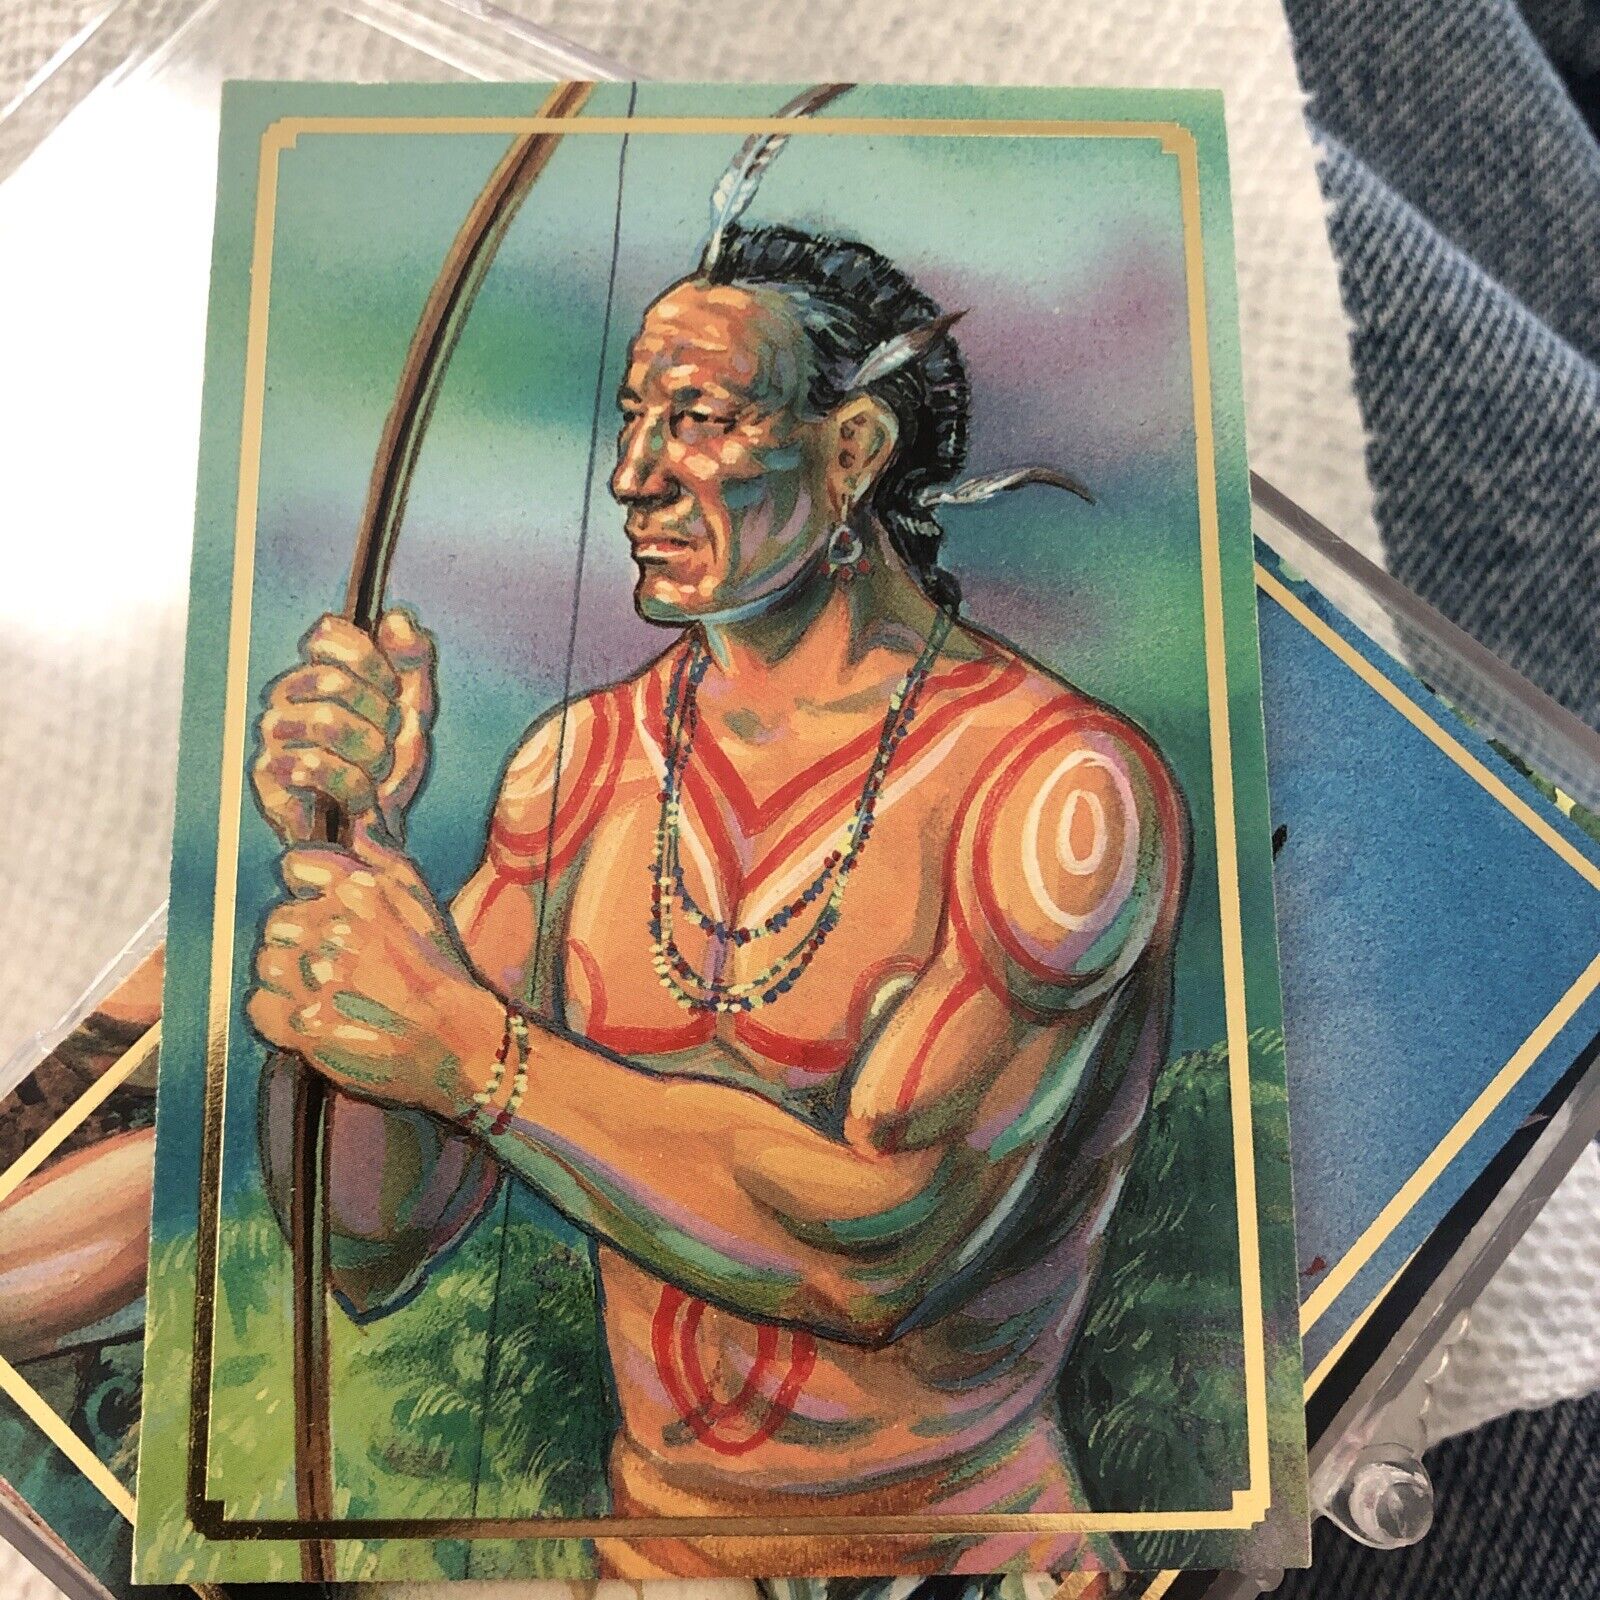 NATIVE AMERICANS (Bon Air 1995) Complete Trading Card Set ART by ZINA SAUNDERS